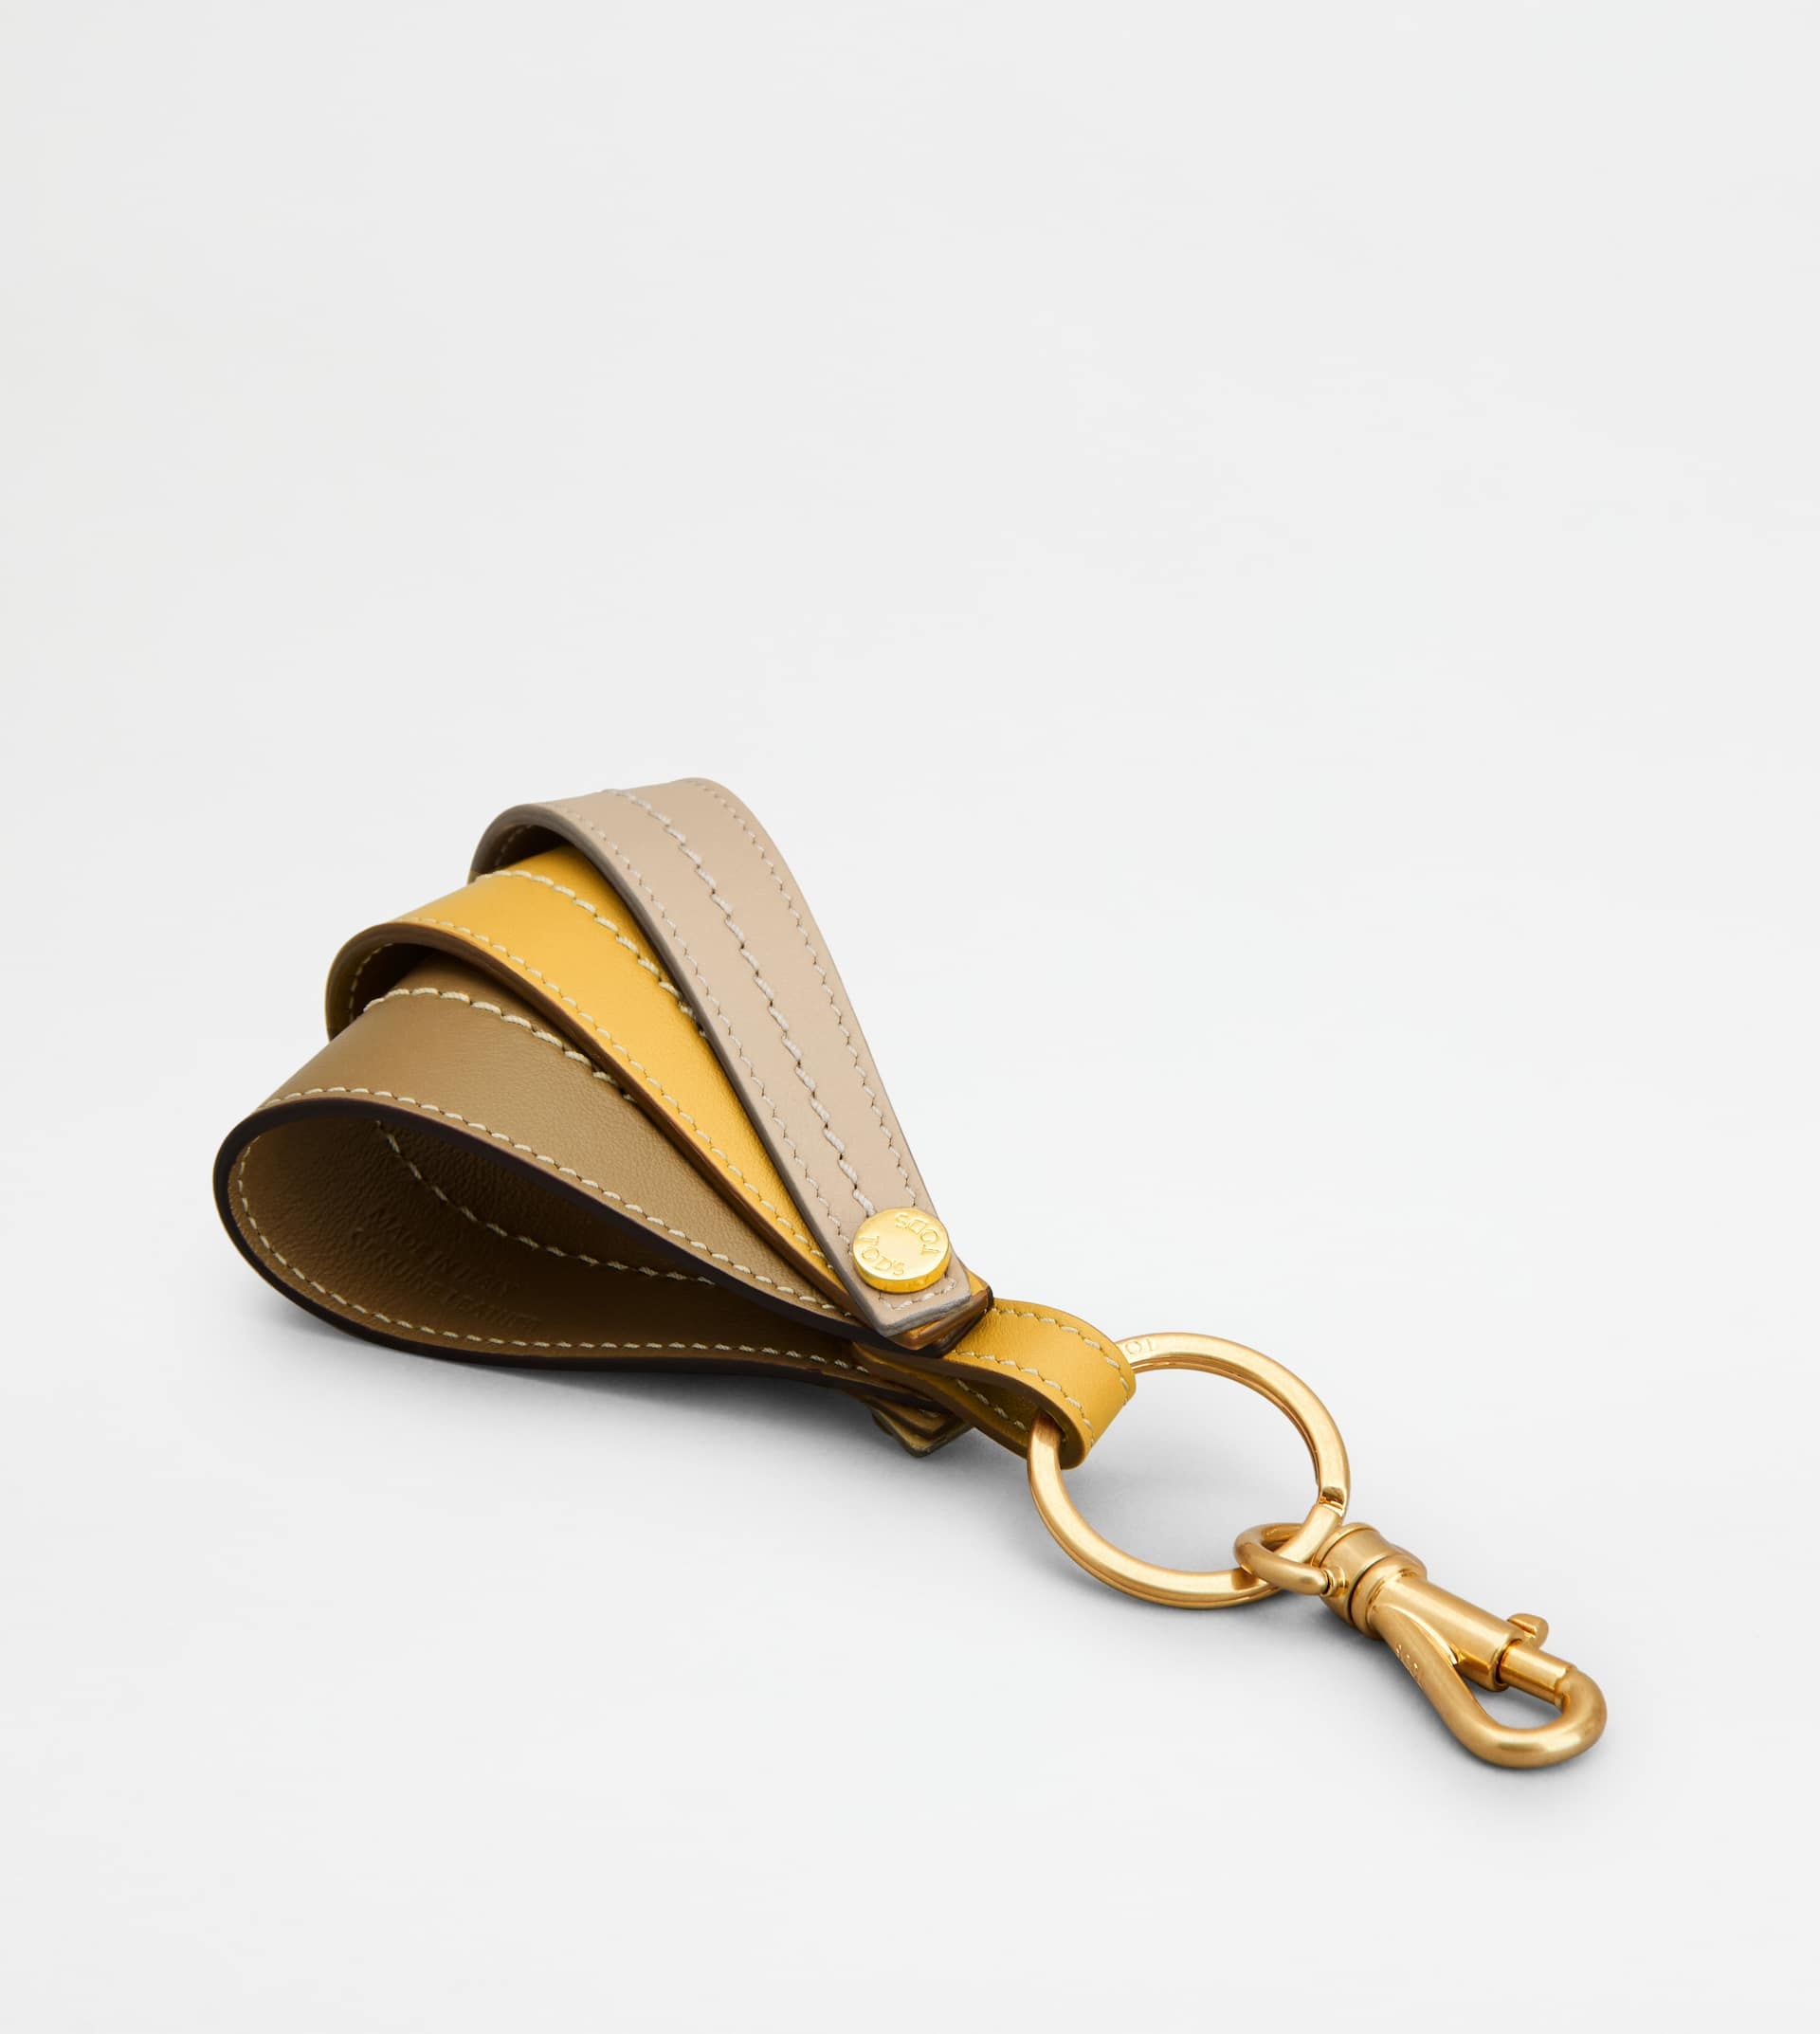 KEY HOLDER IN LEATHER - BEIGE, YELLOW, BROWN - 2